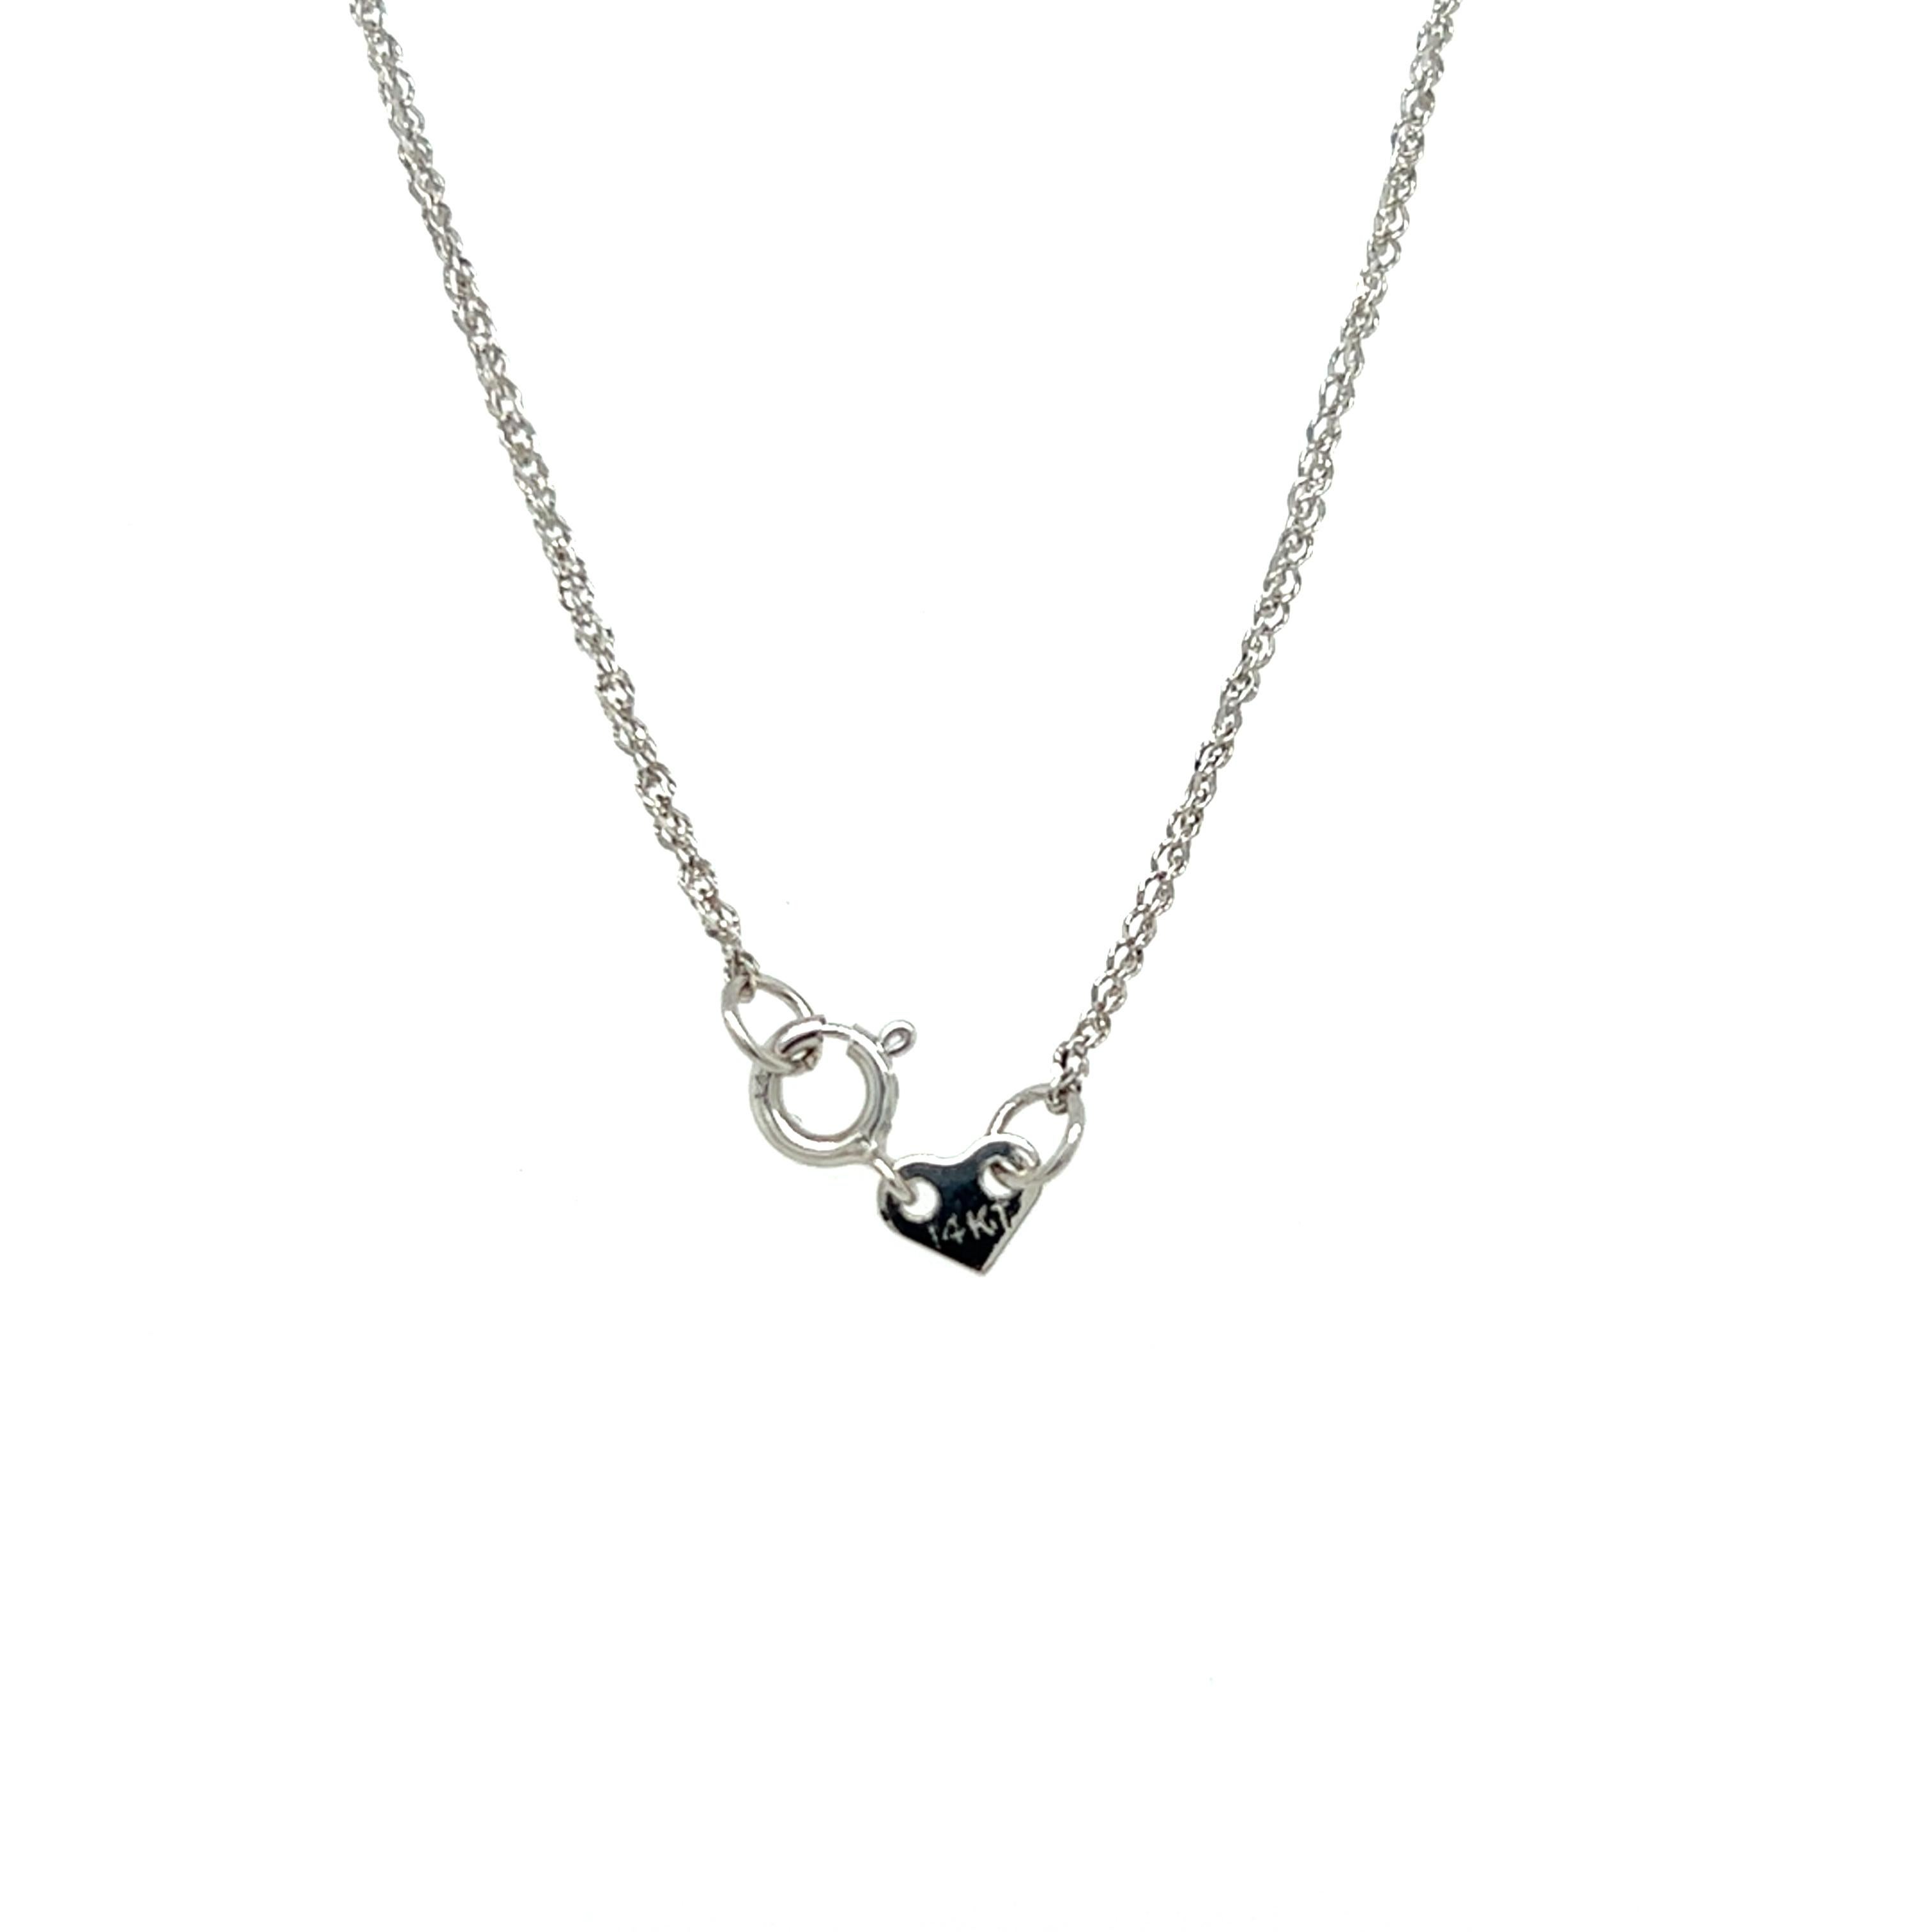 Contemporary Mark Henry Alexandrite and Diamond Pendant Necklace in 18k White Gold